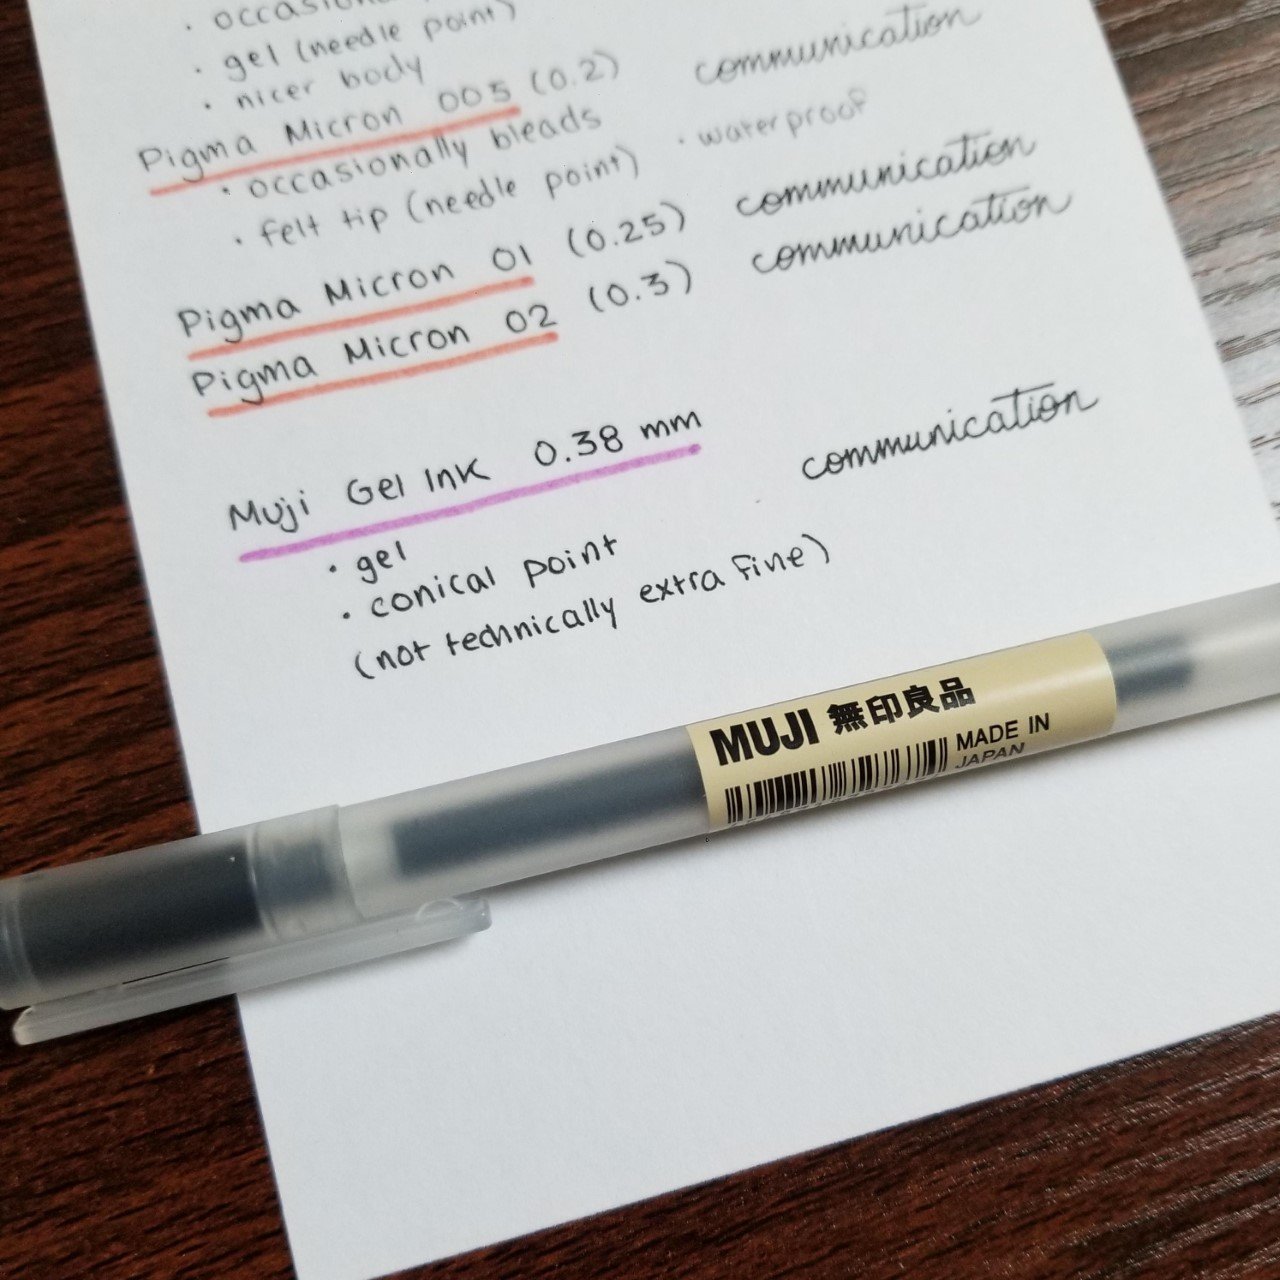 Jo(sephine) Lukito on X: Finally--I included the Muji gel pen 0.38mm (the  smallest tip I am aware of). It's not technically an extra fine tip, but  it's a great beginner pen for